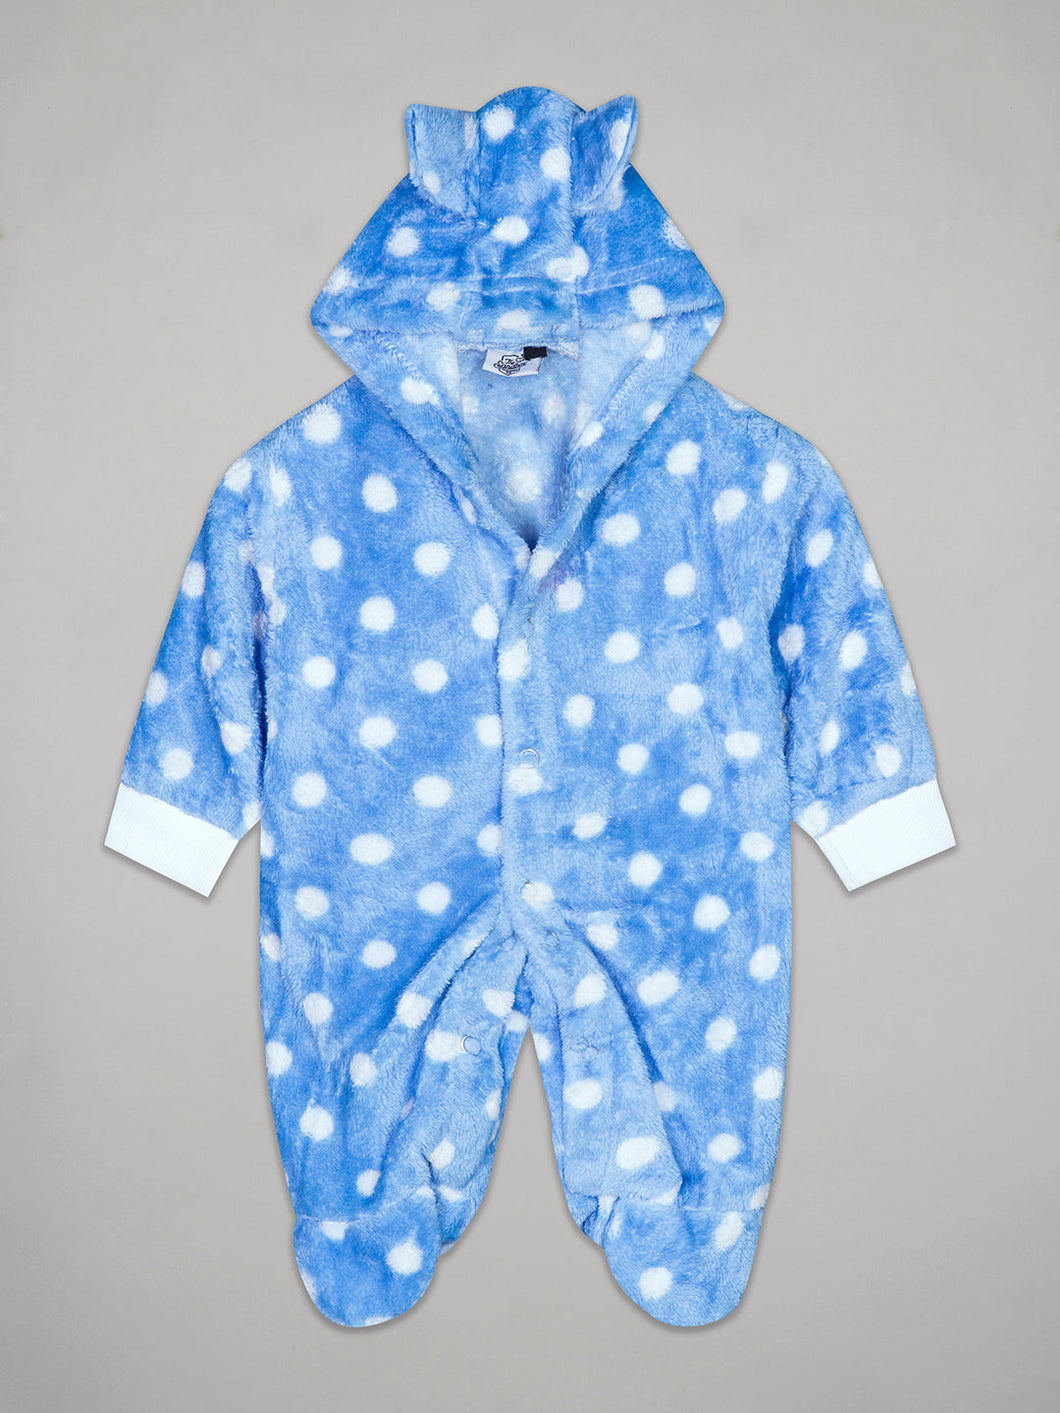 The Sandbox Clothing Co. Winter Rompers RM282